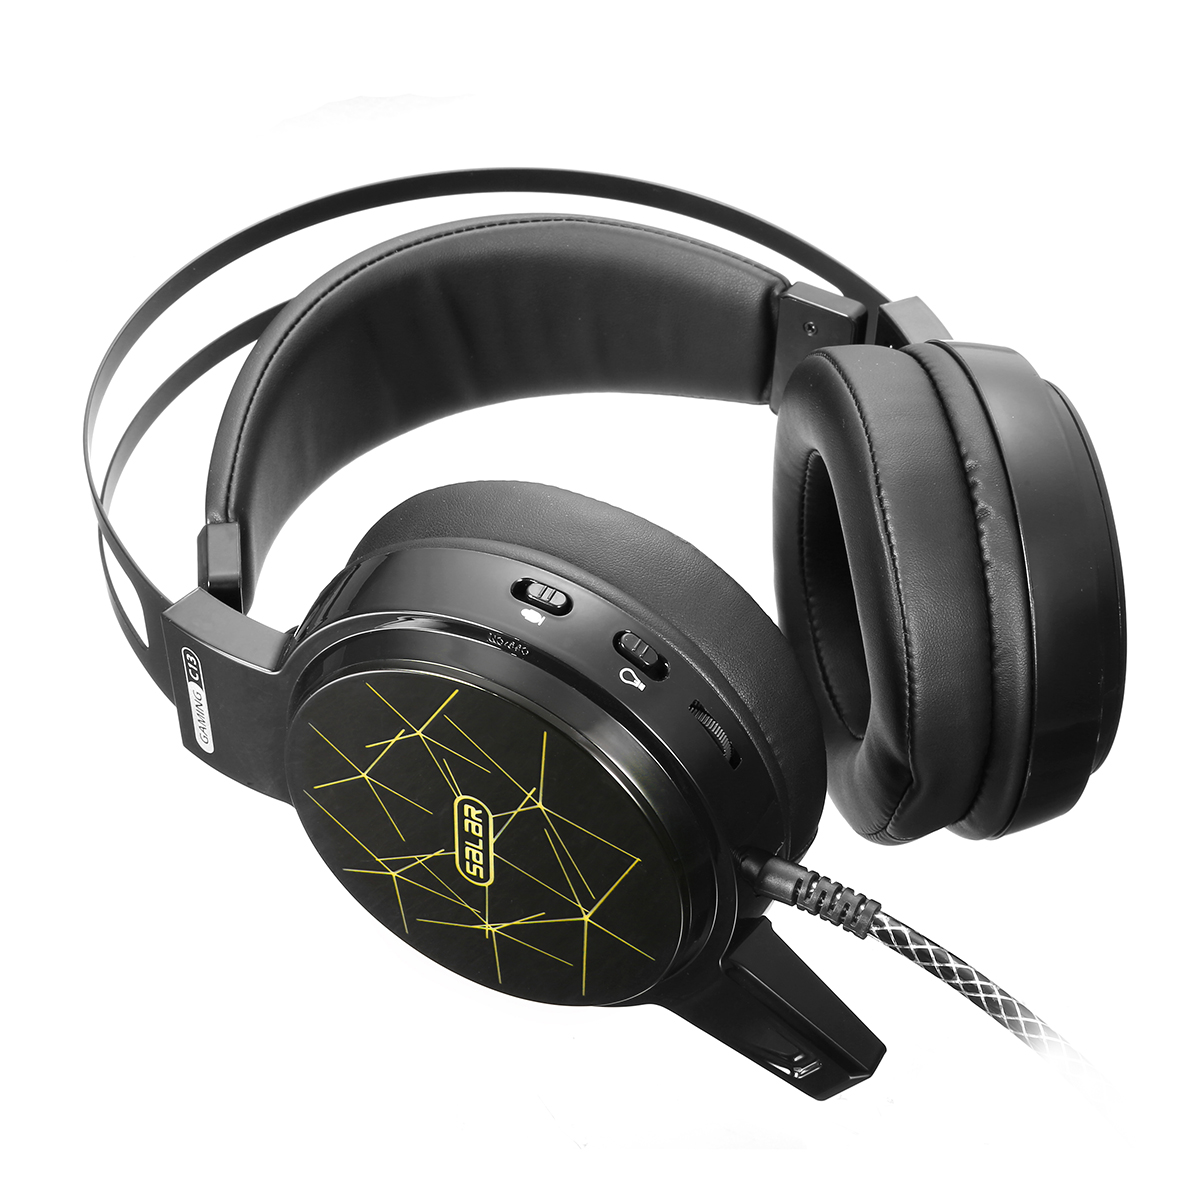 Find C13 Wired Gaming Headset 3 5mm Surround Sound 40mm Driver LED Light Headphone for PS3/4 for Xbox PC Laptop for Sale on Gipsybee.com with cryptocurrencies